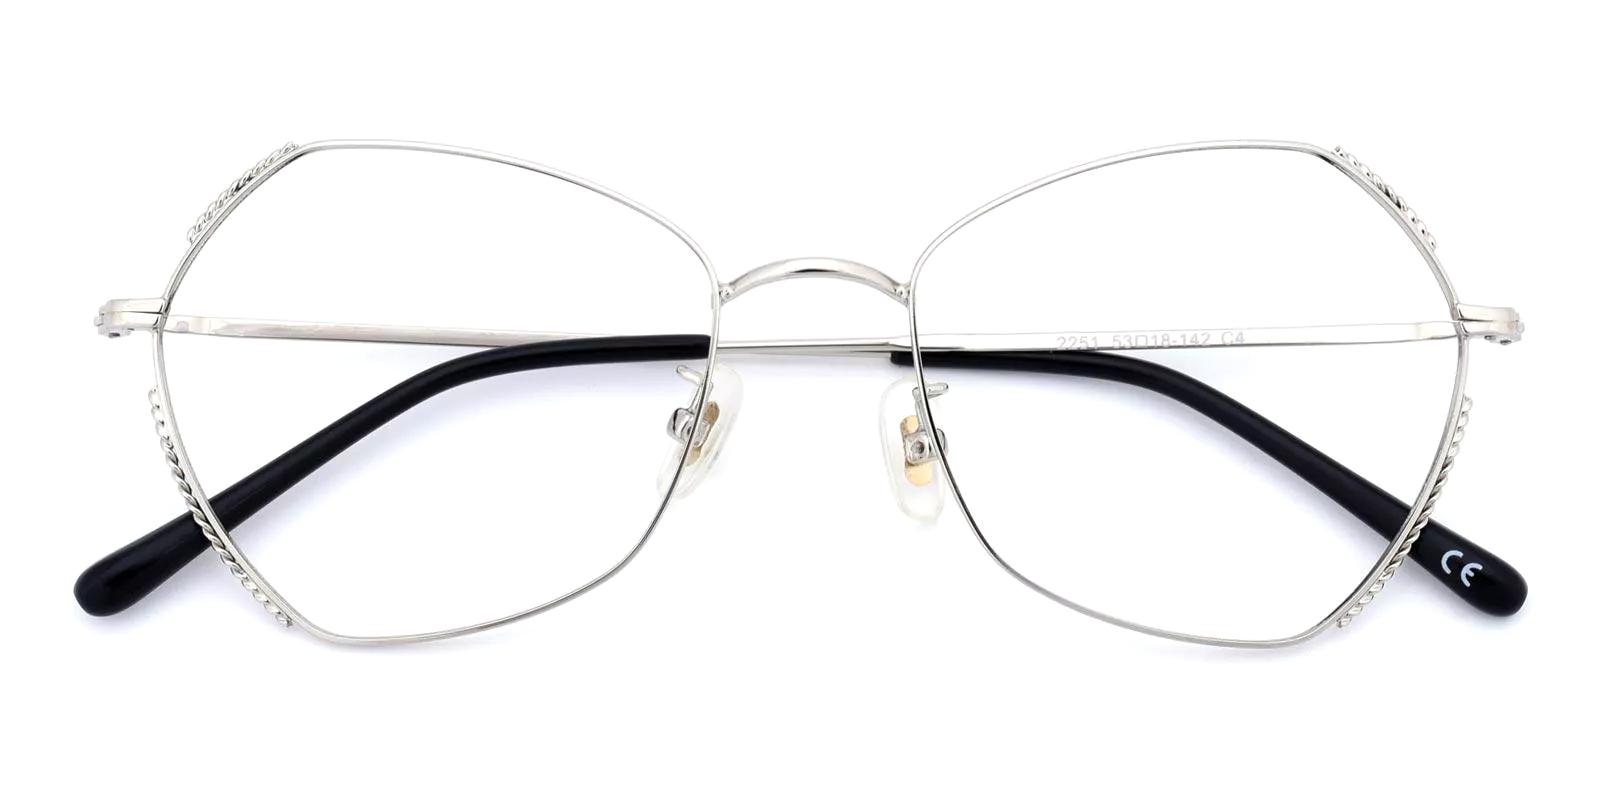 Dontic Silver Metal Eyeglasses , NosePads Frames from ABBE Glasses